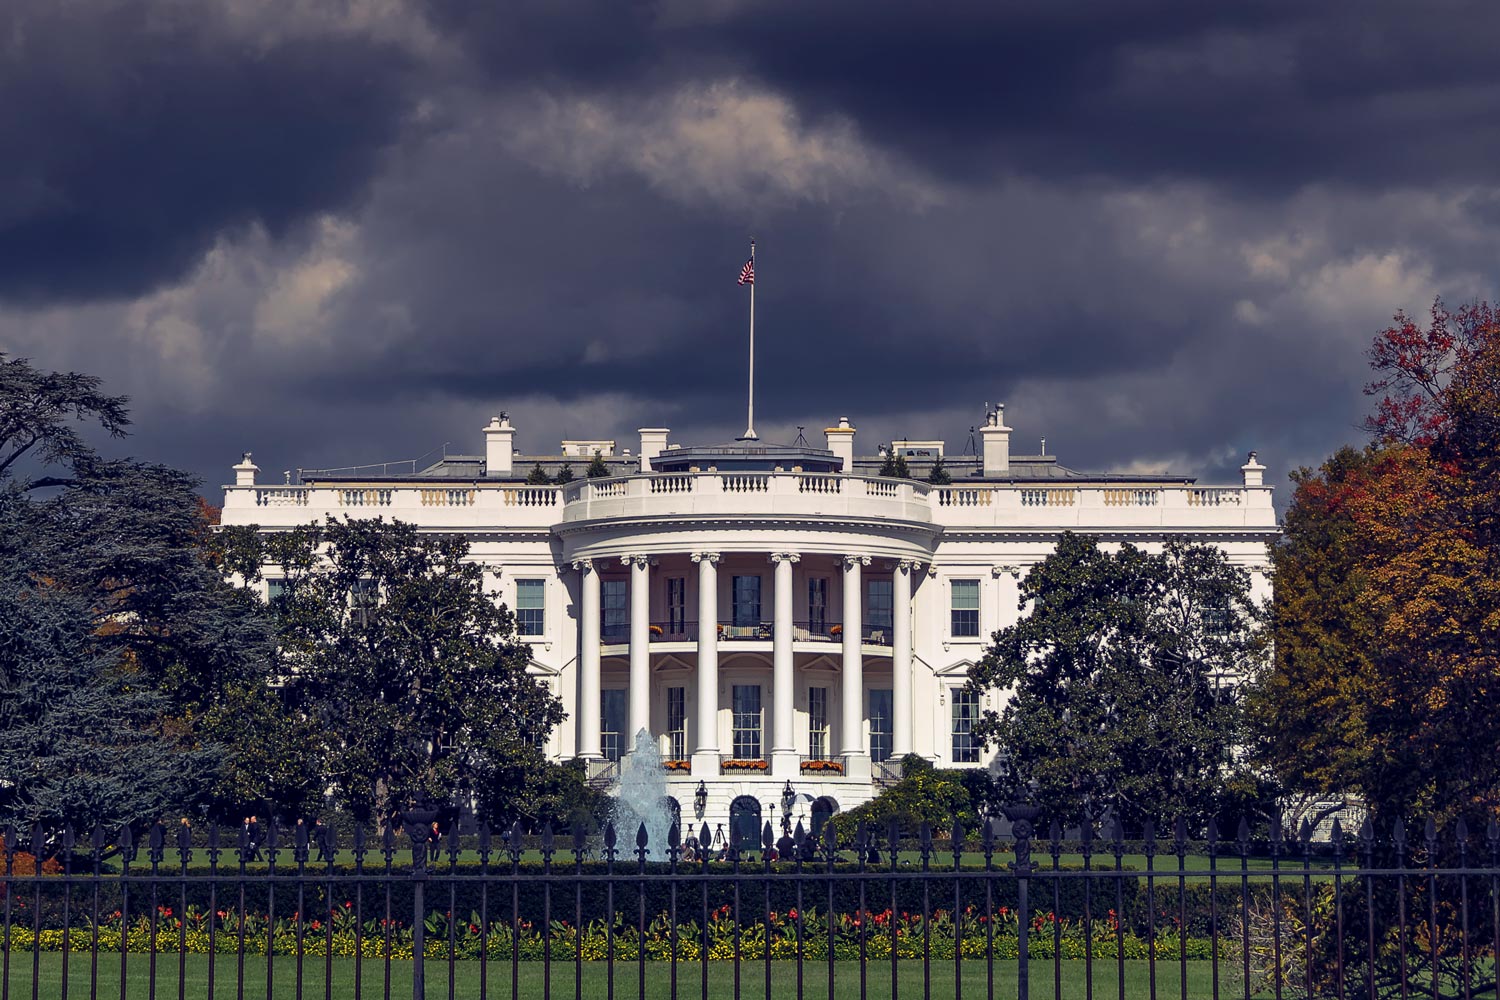 The White House with Dark storm clouds above